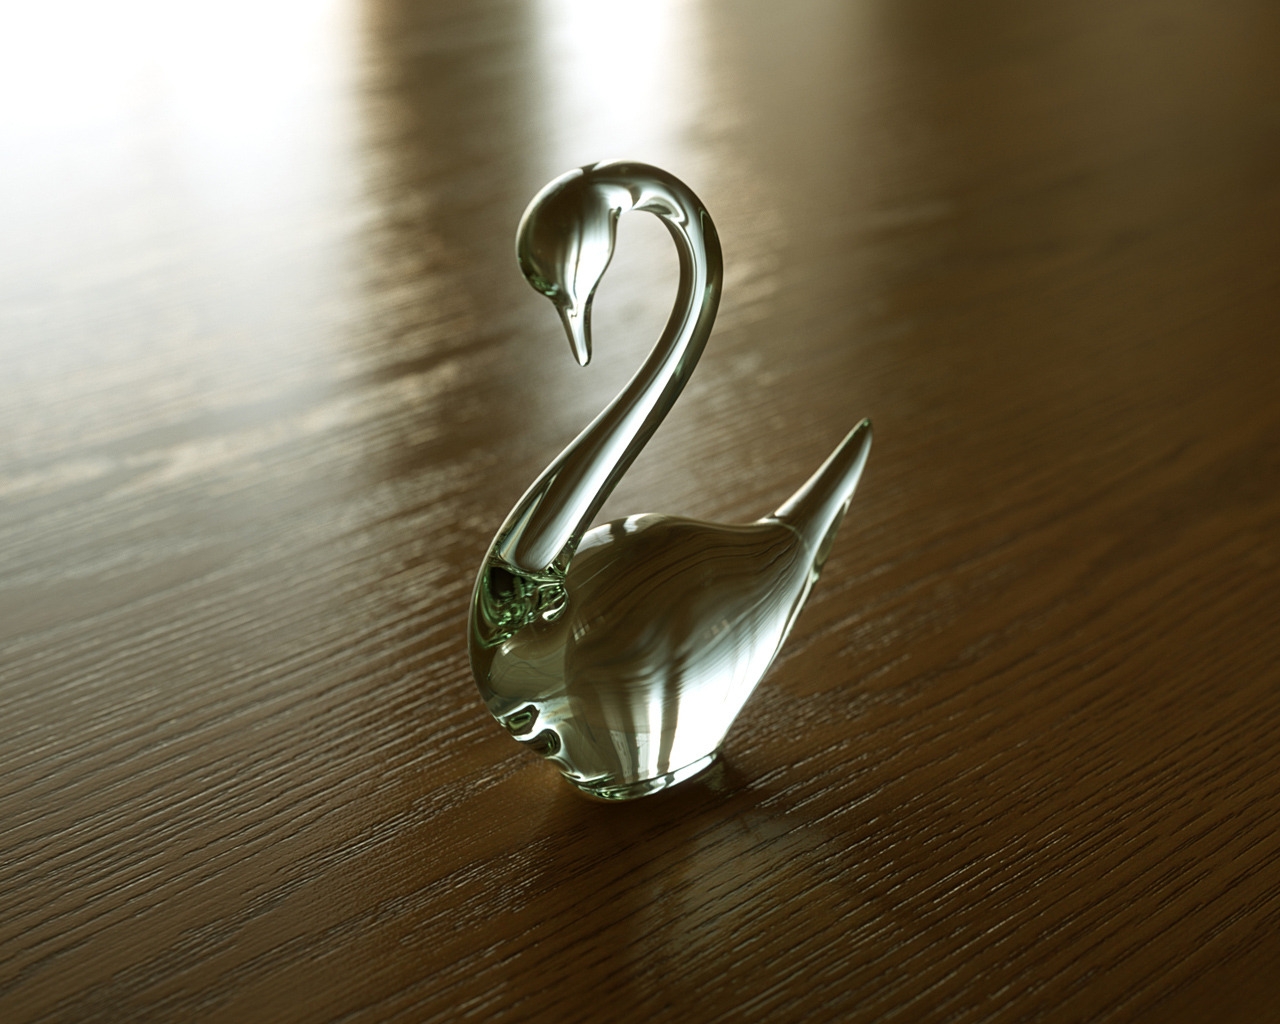 Glass Swan for 1280 x 1024 resolution